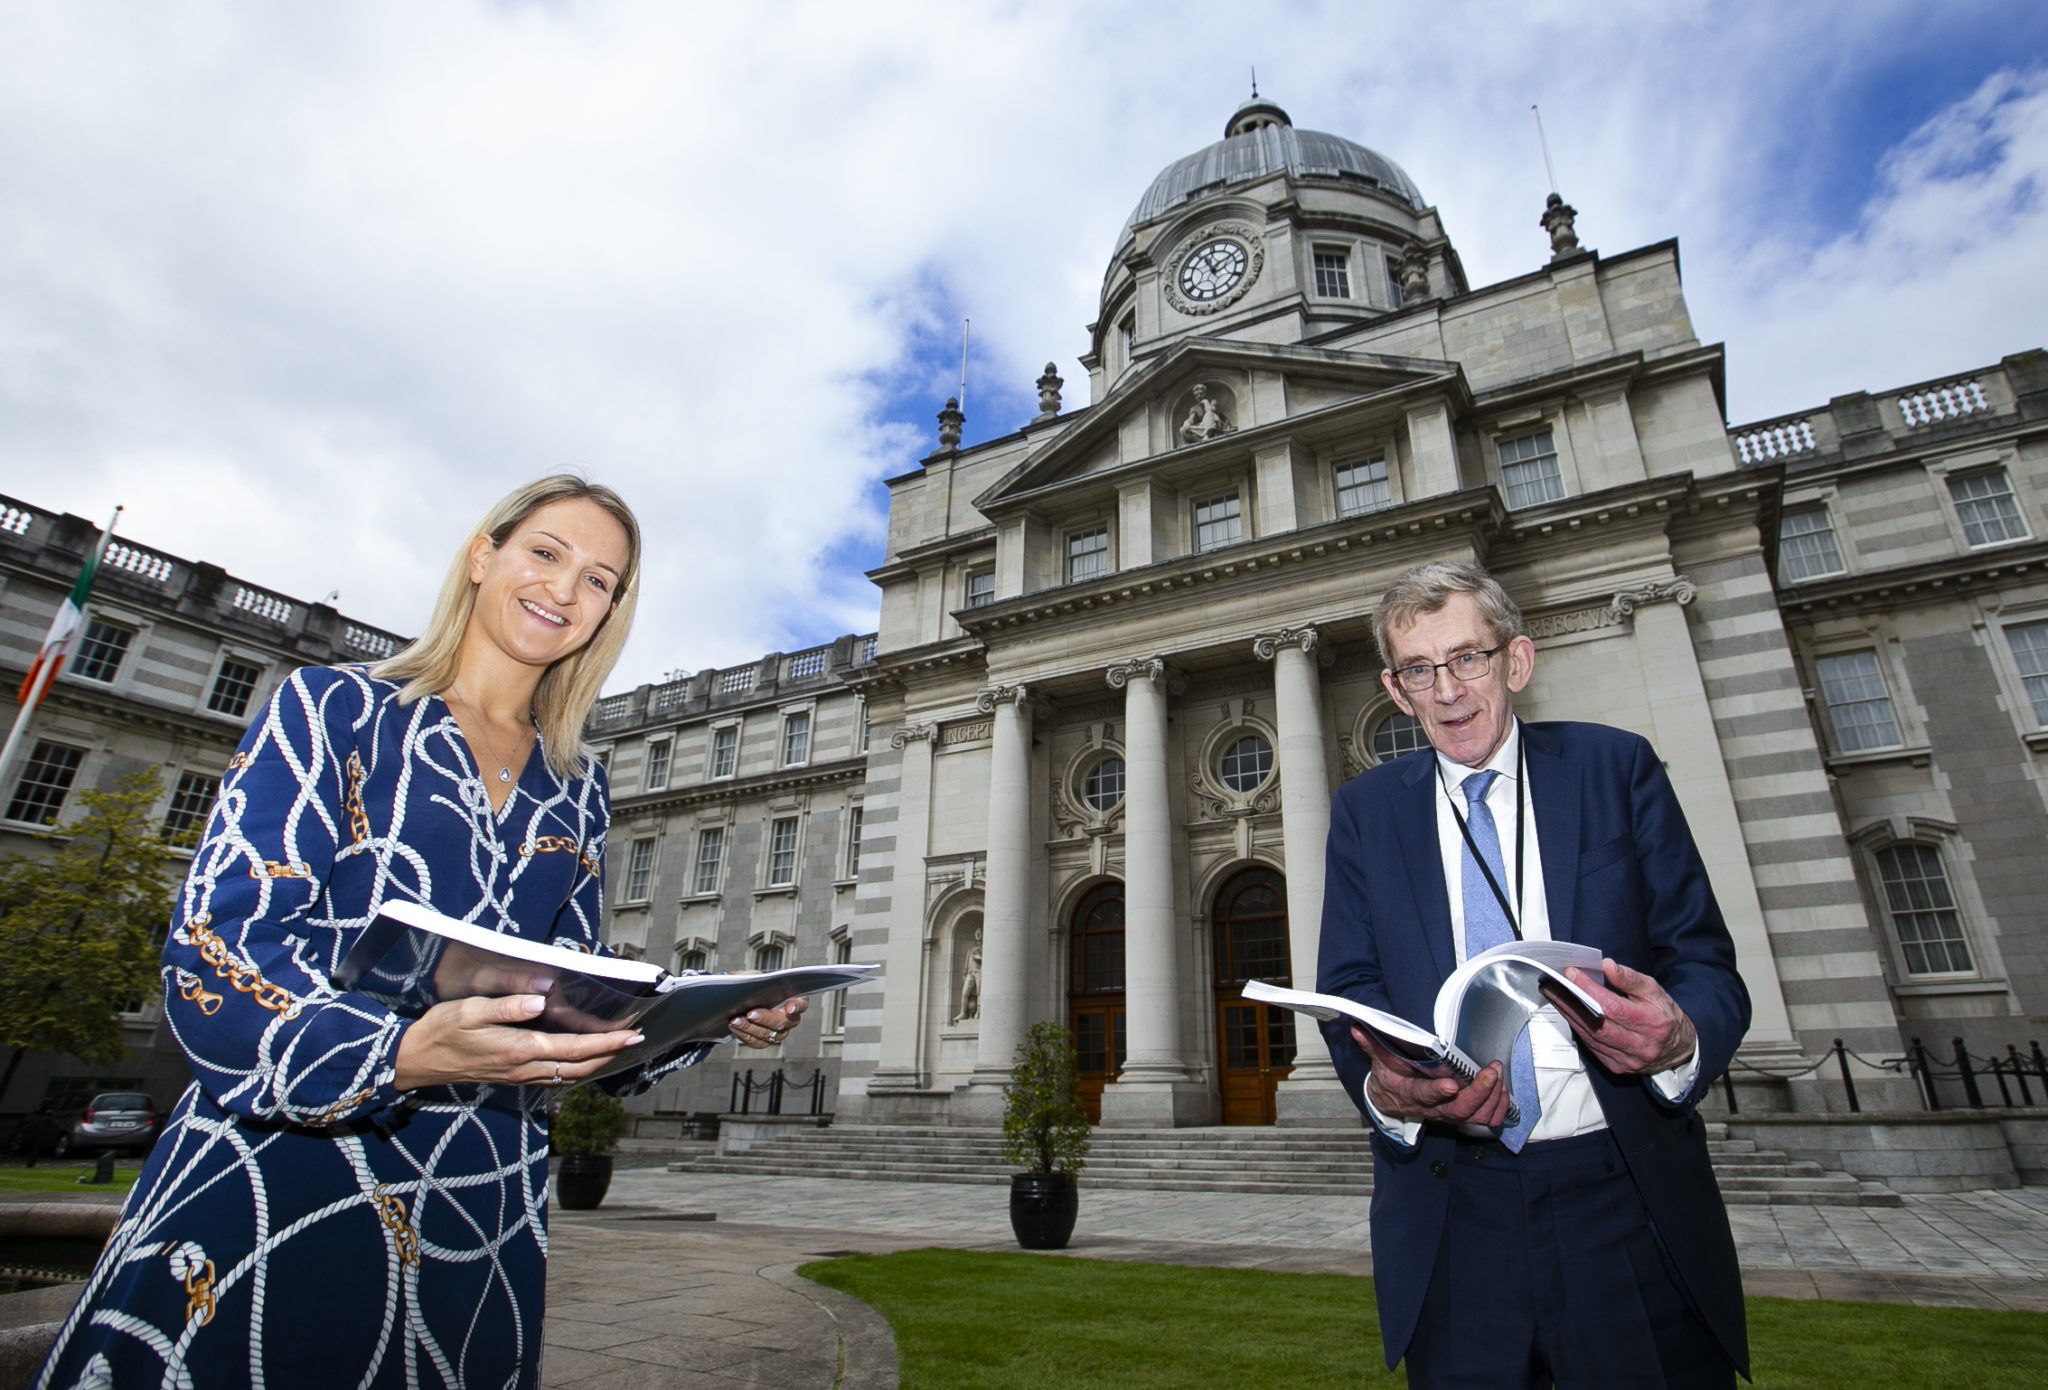 The Justice Minister Helen McEntee and barrister Tom O’Malley at the launch of the O’Malley Review of Protections for Vulnerable Witnesses in the Investigation and Prosecution of Sexual Offence